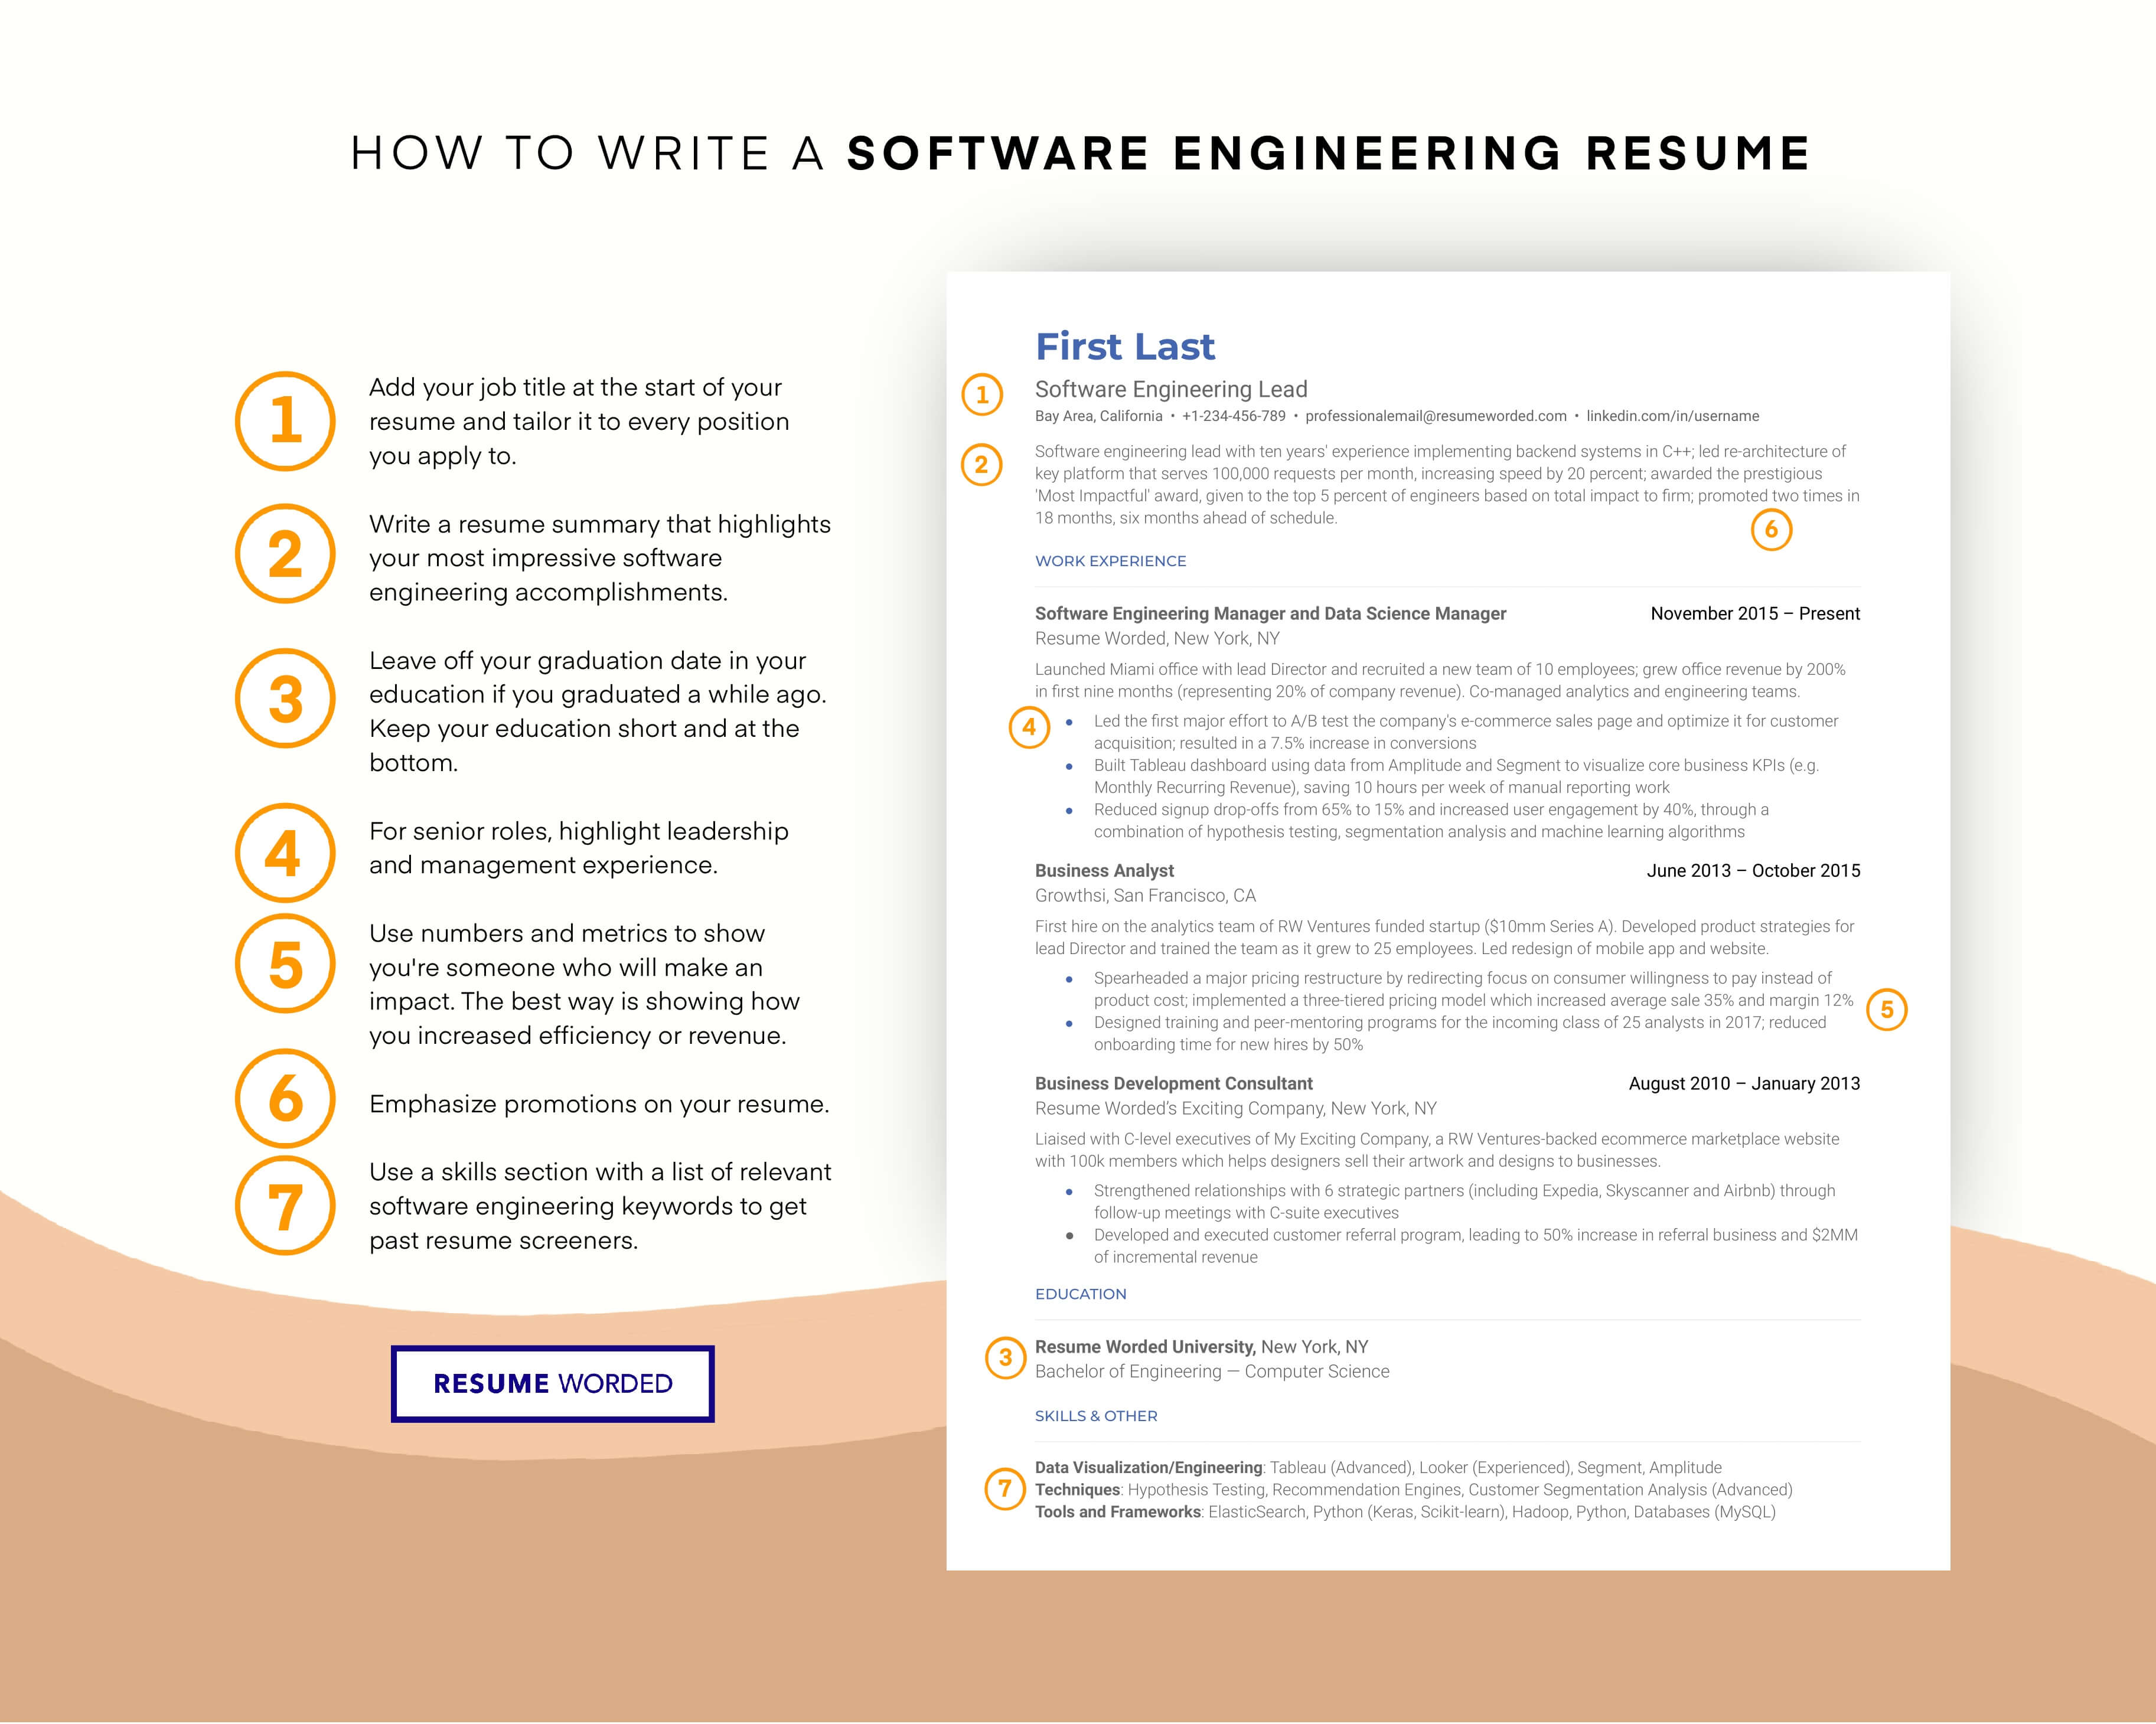 Include specific software and systems - Software Support Technician CV